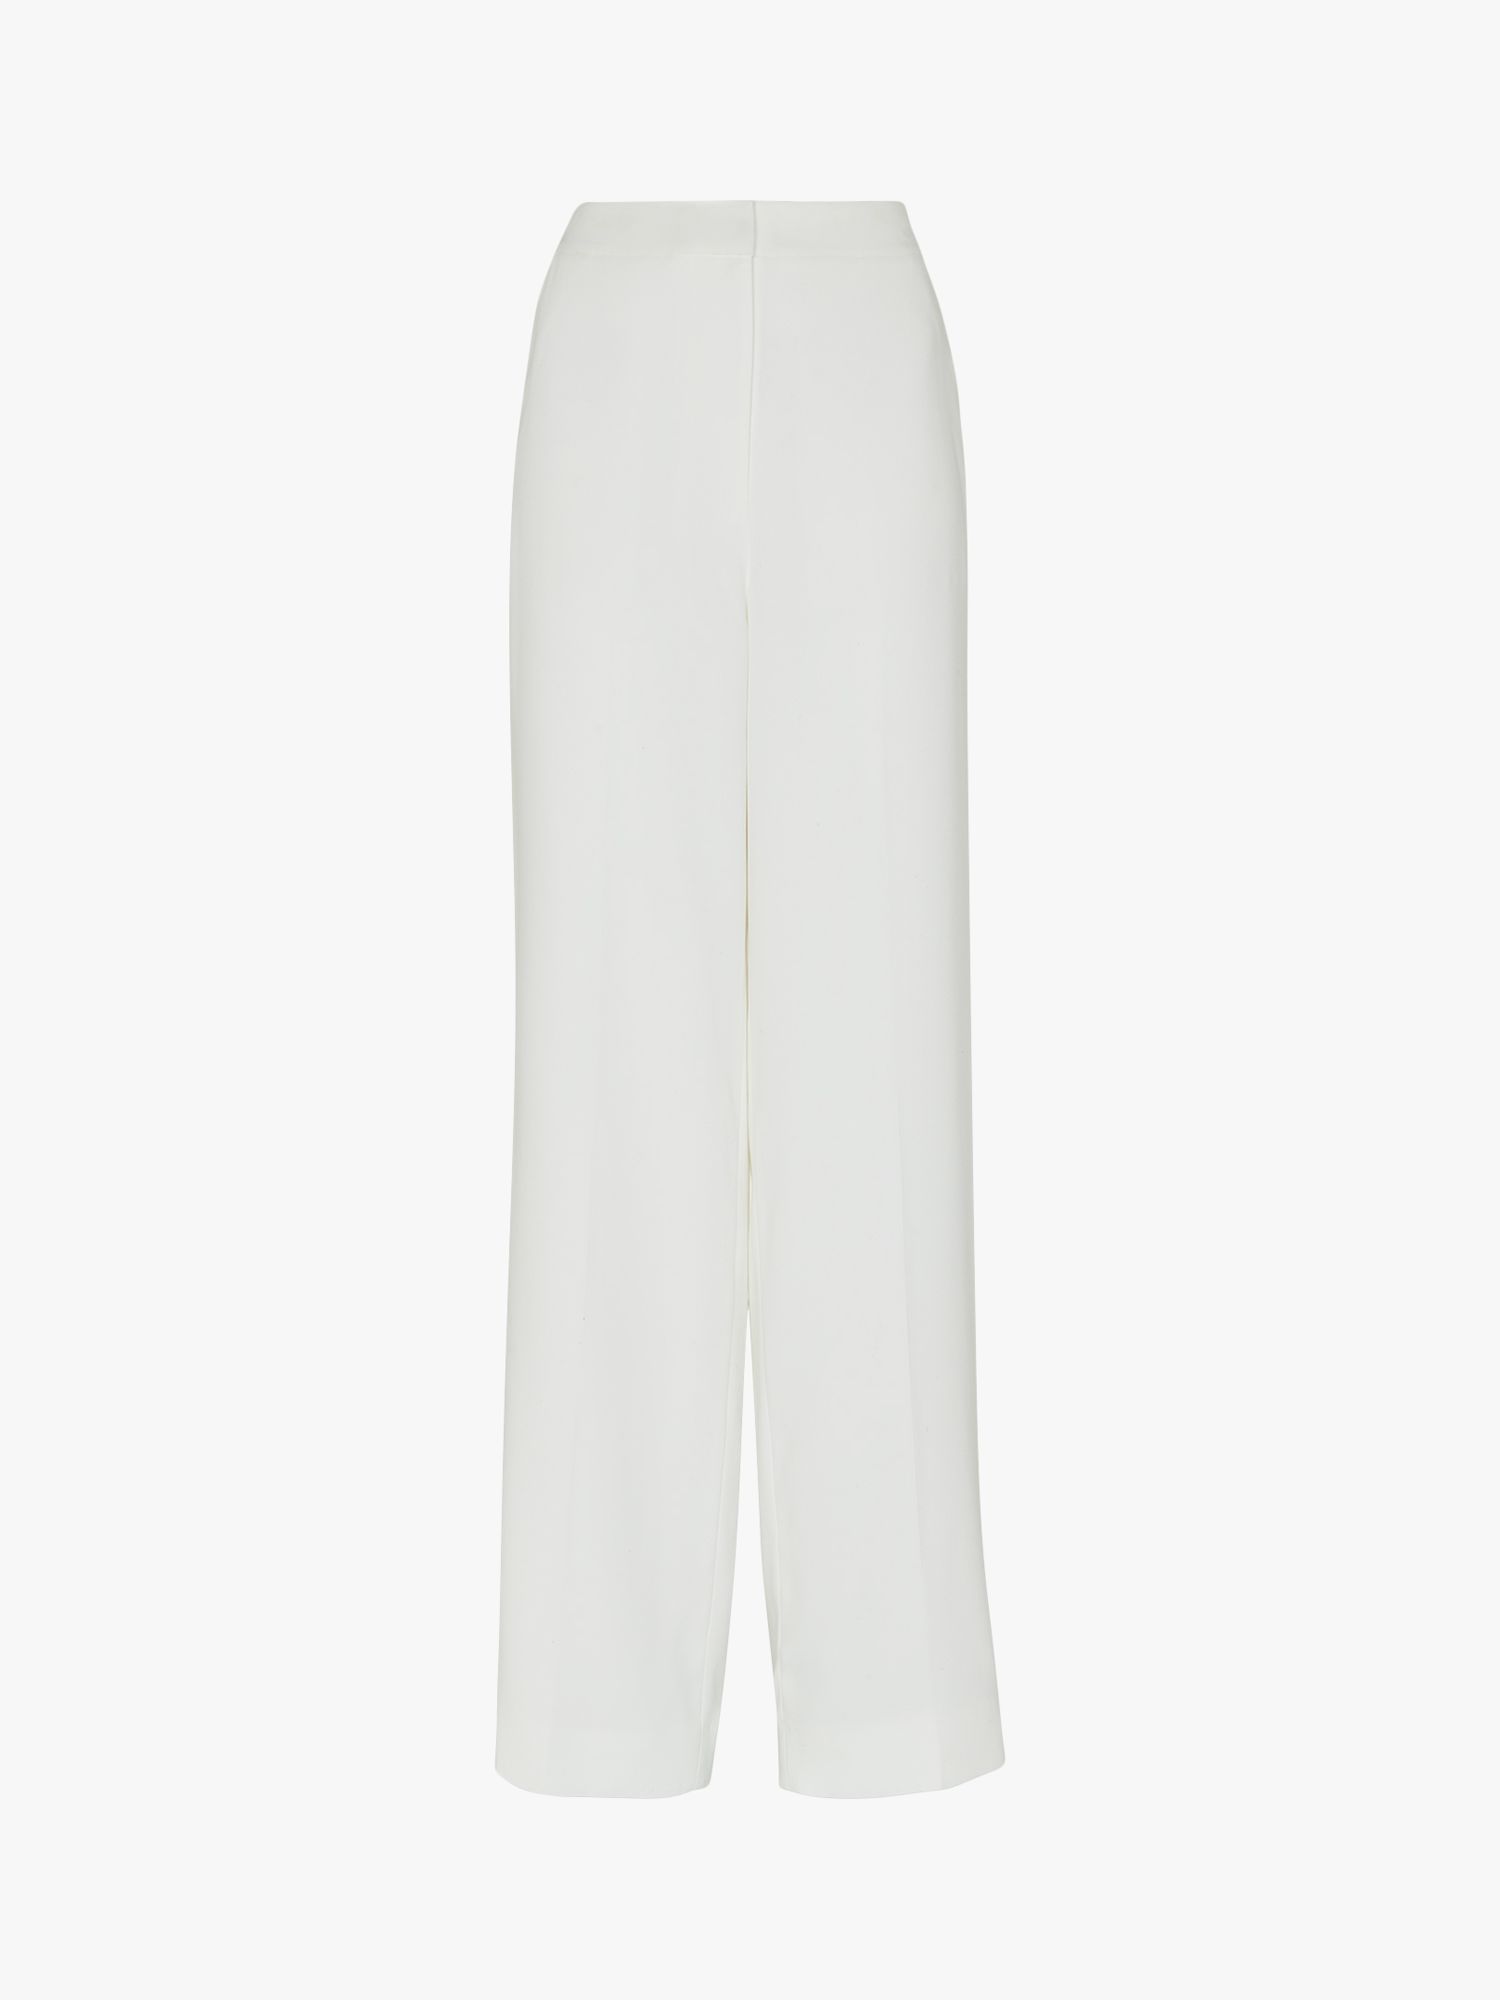 Whistles Annie Wedding Trousers, Ivory, 6